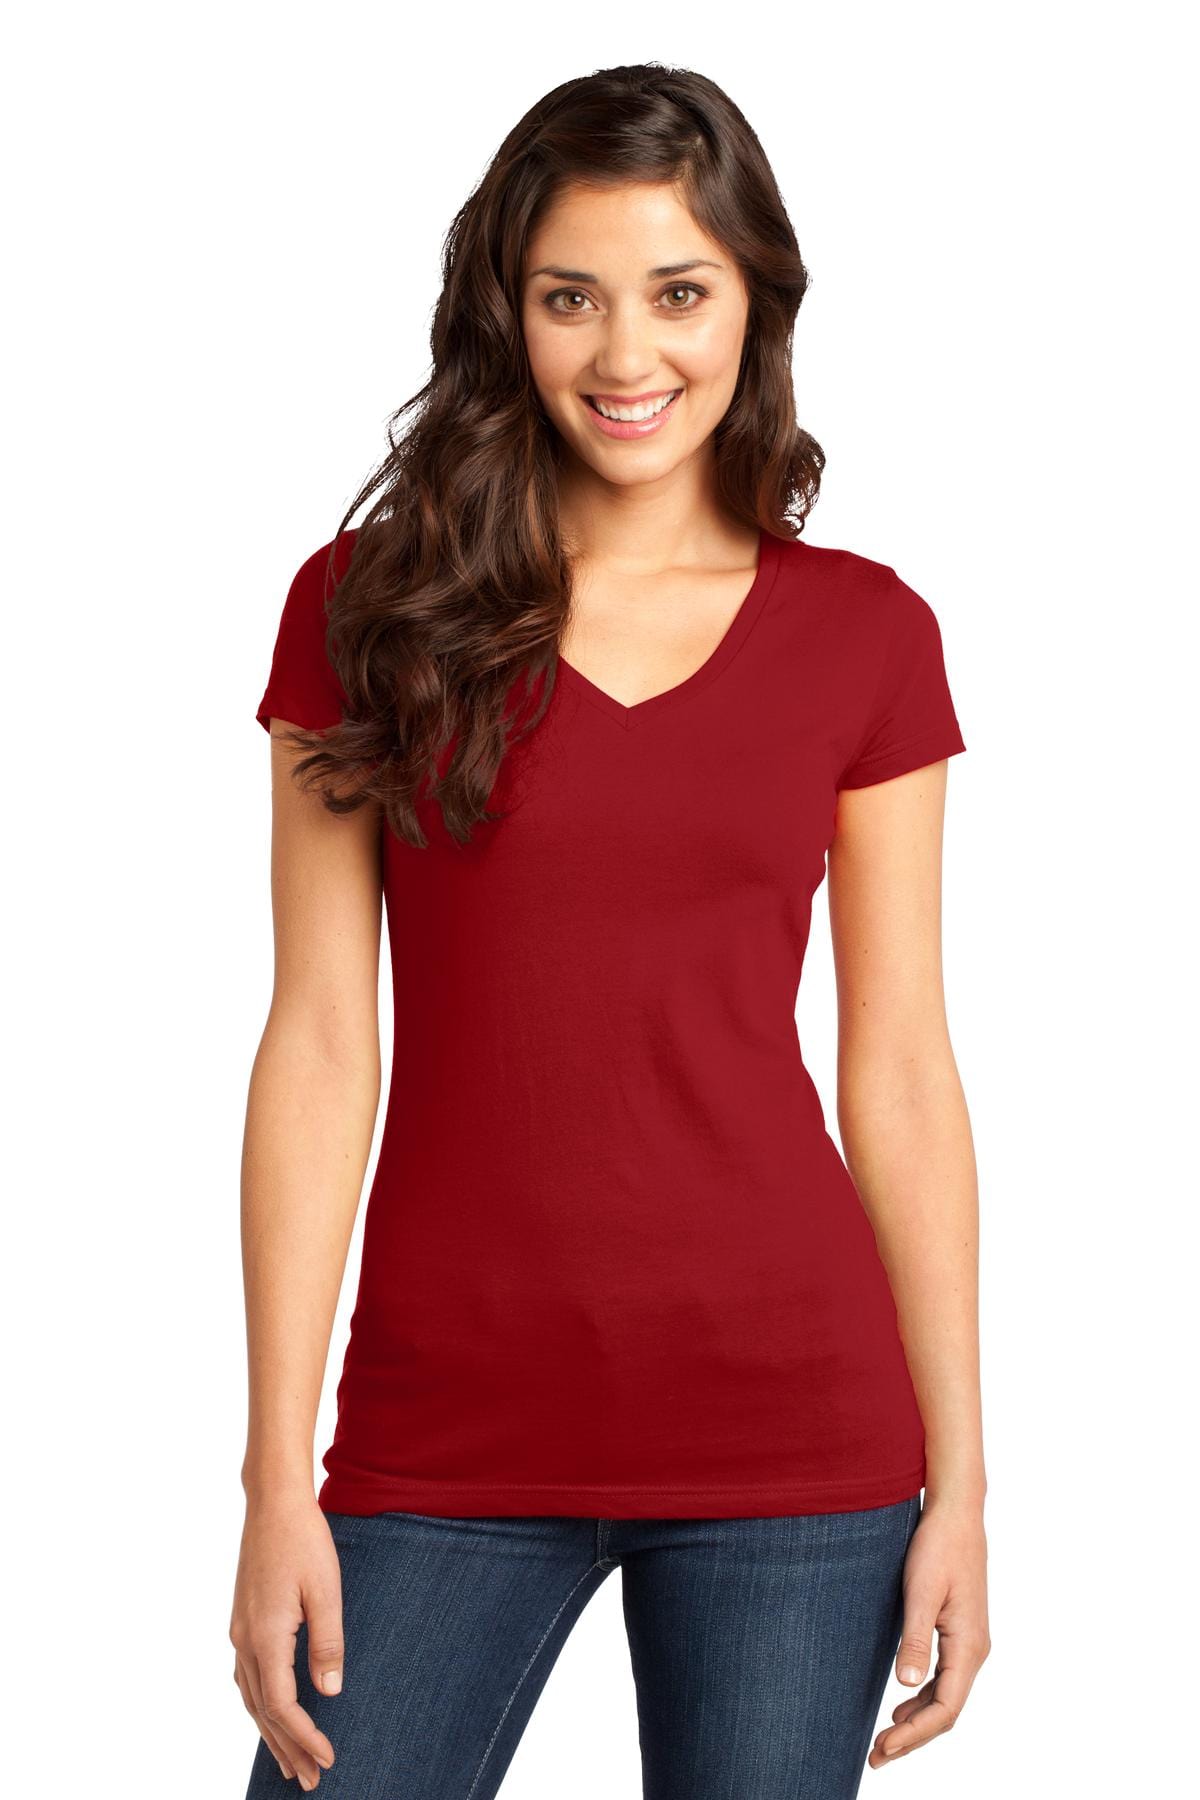 DISCONTINUED  District ®  - Juniors Very Important Tee ®  V-Neck. DT6501, Basic Colors